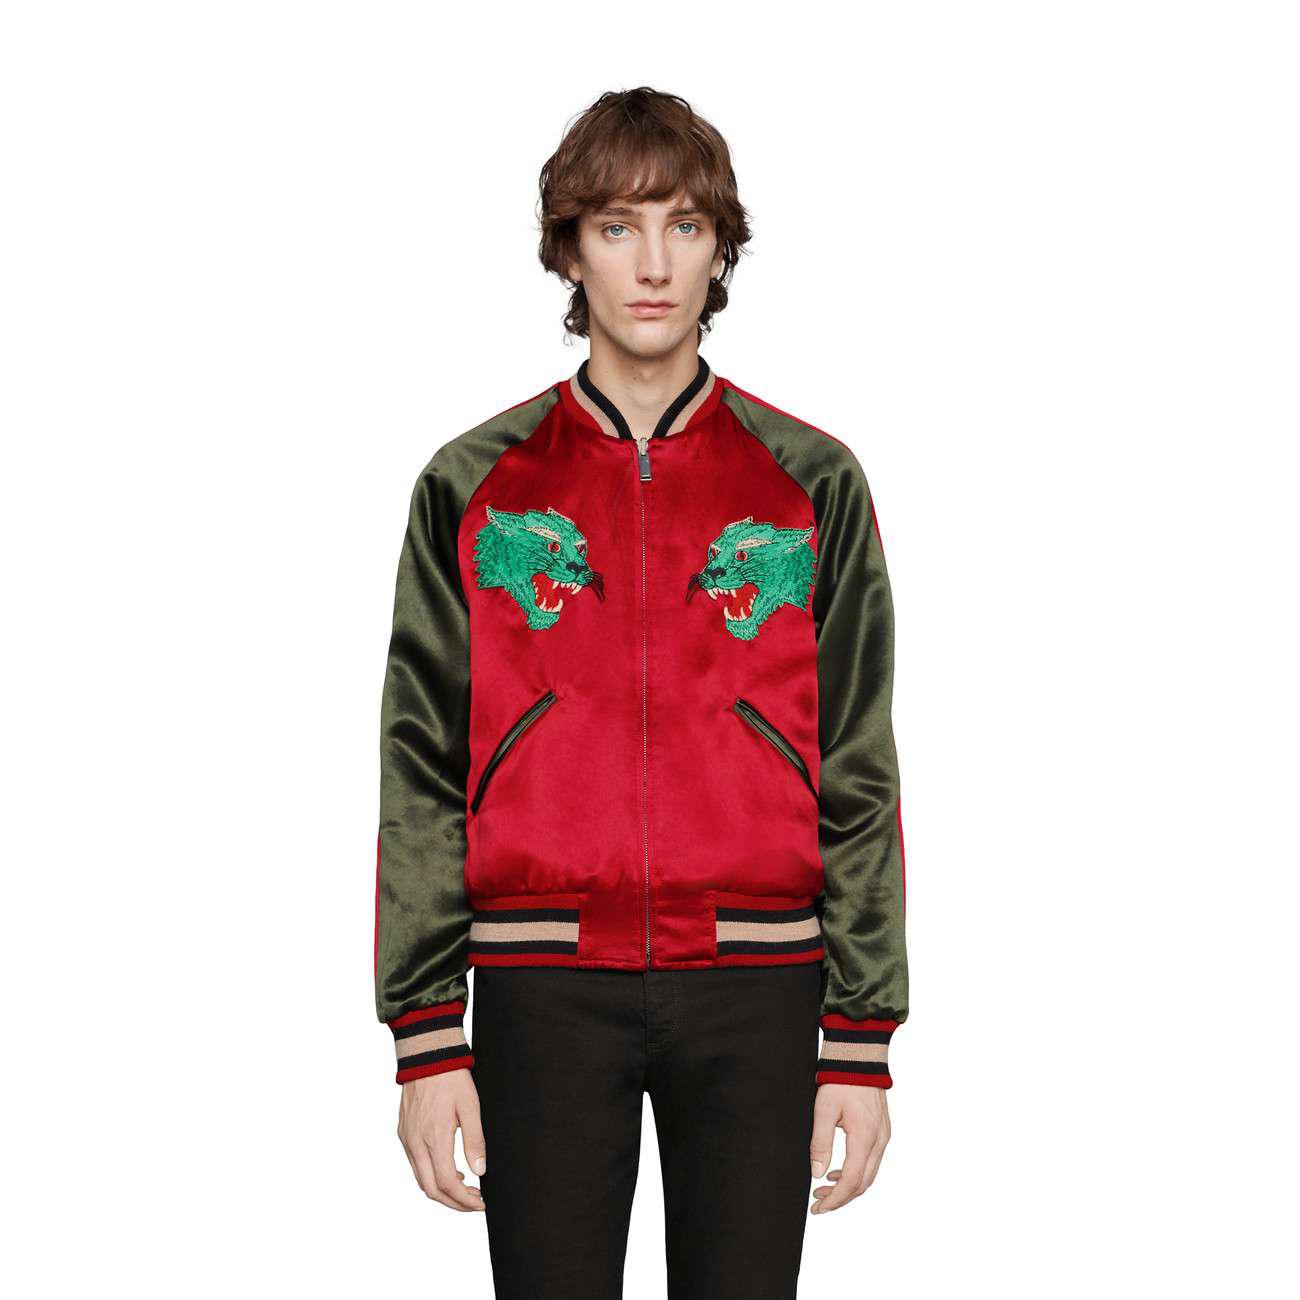 Gucci Reversible Acetate Bomber Jacket in Green for Men - Lyst